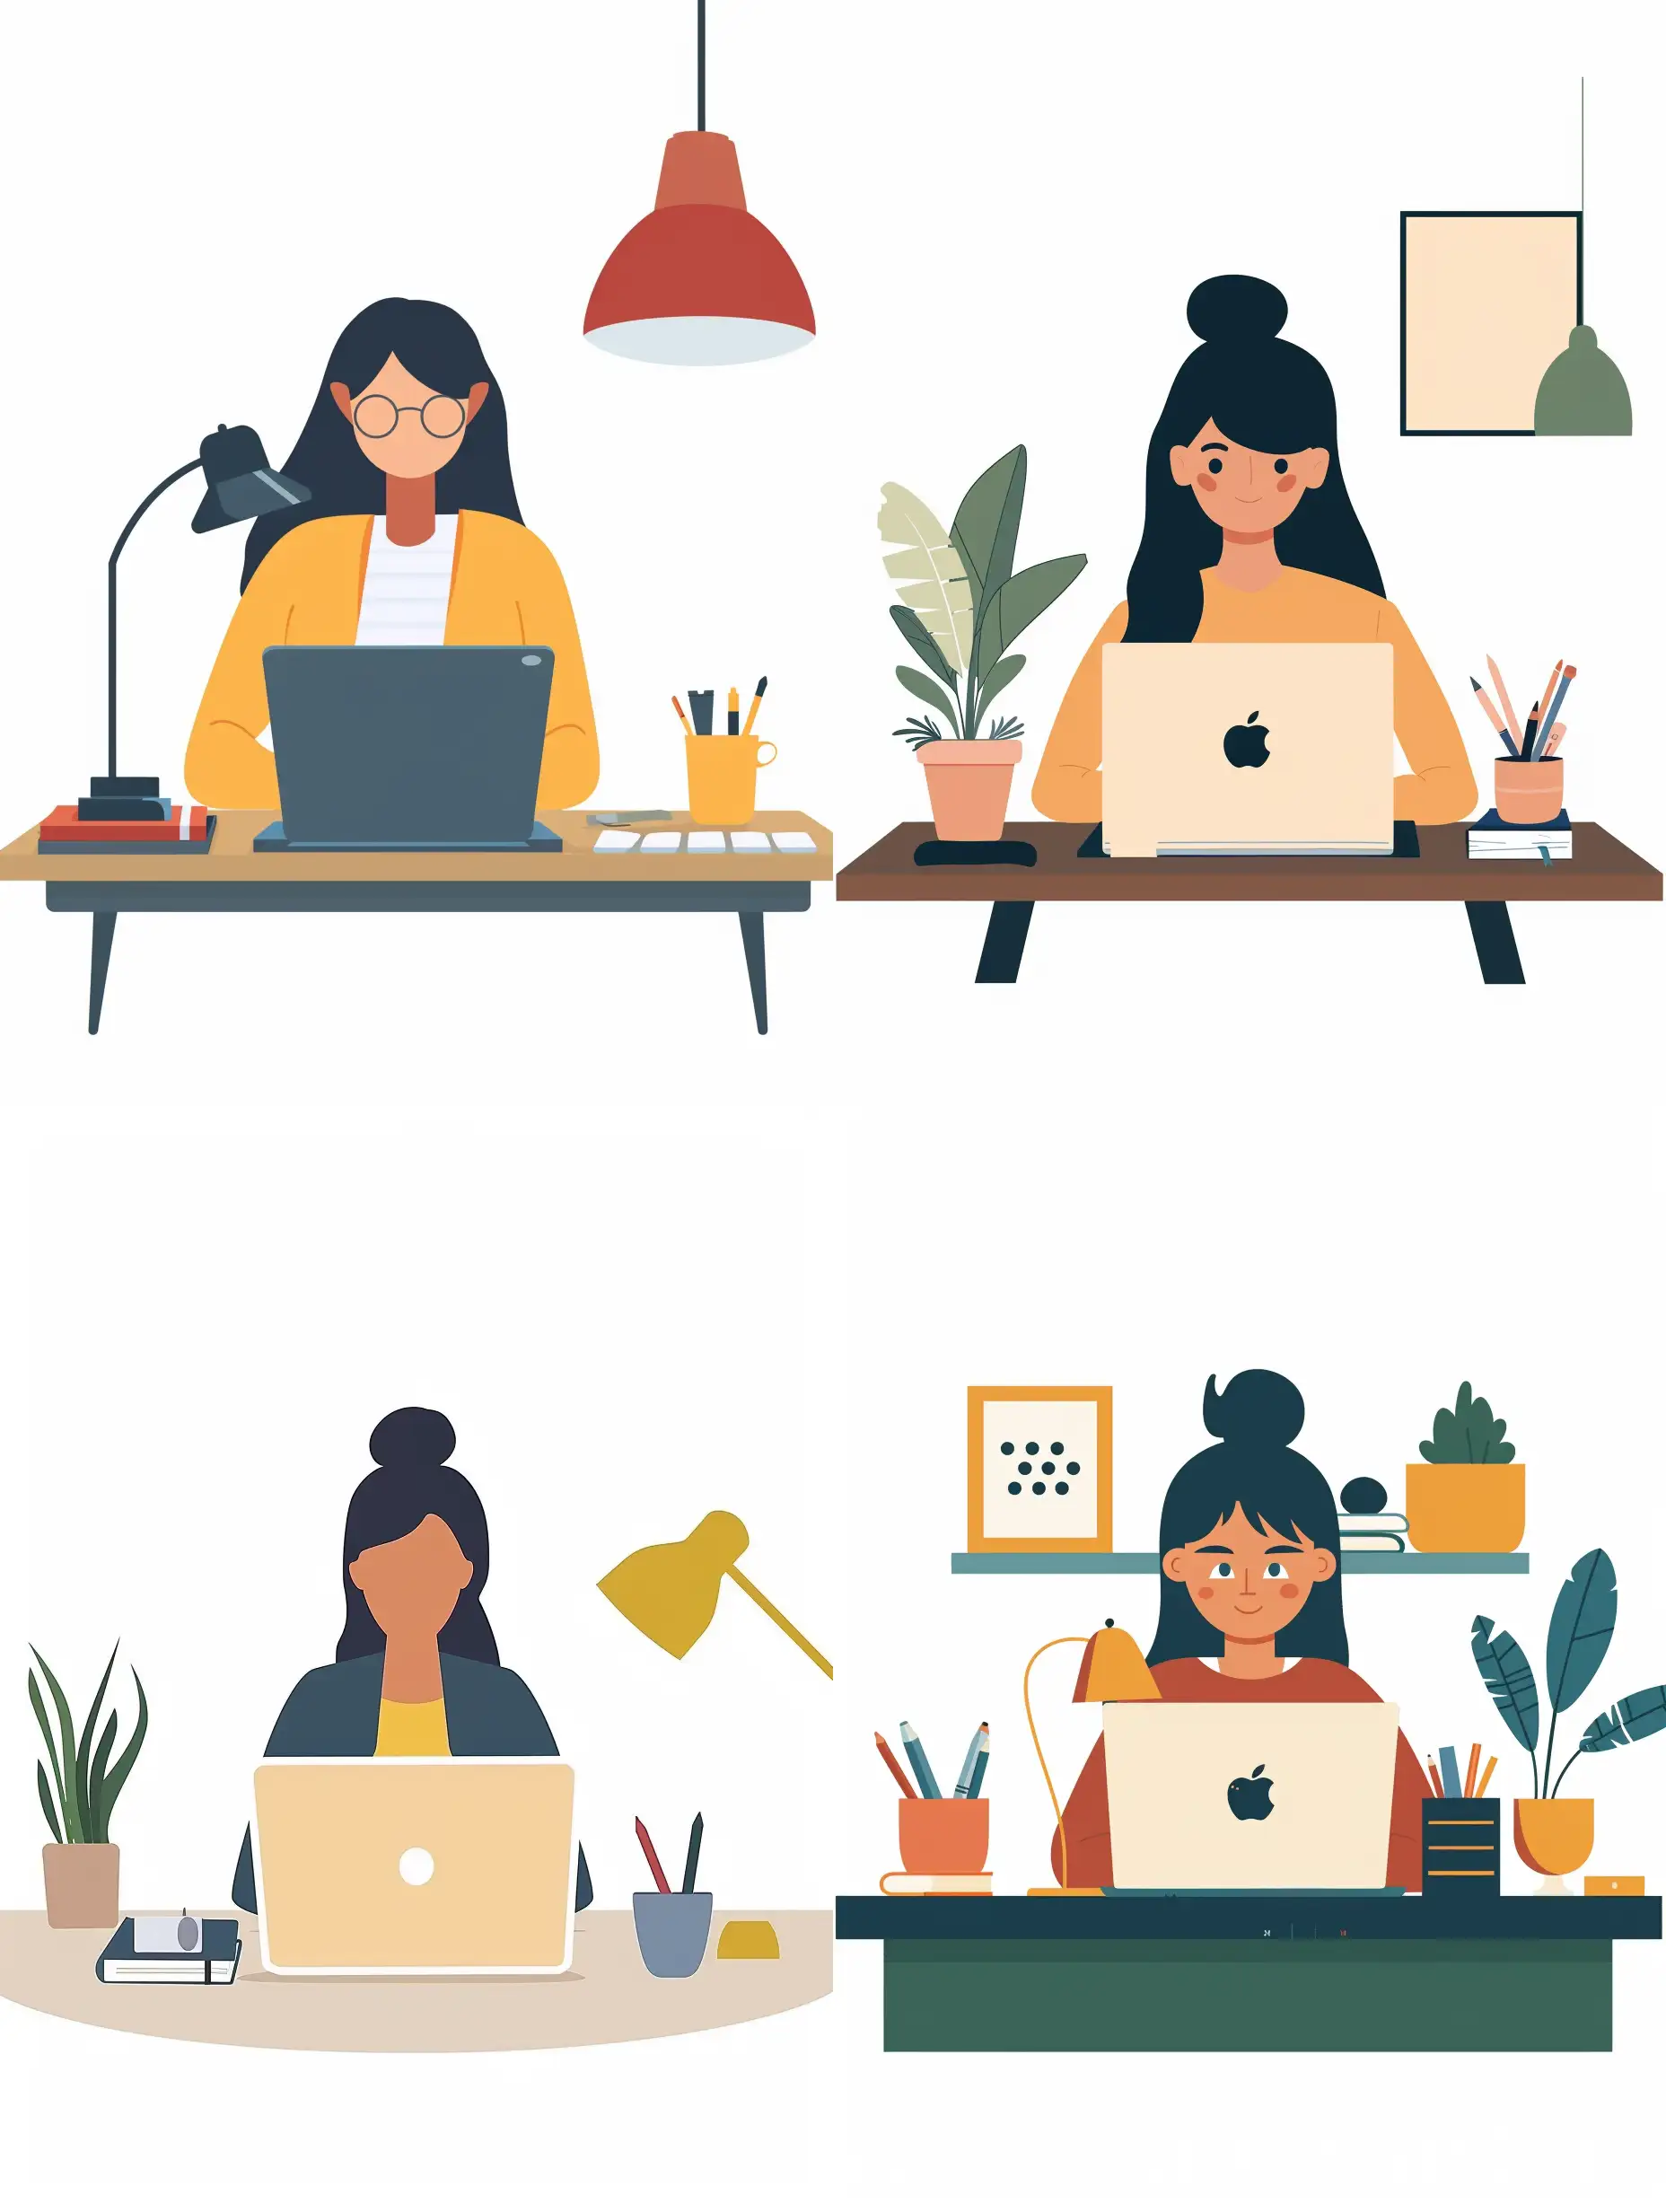 Home-Office-Productivity-Woman-Working-on-Laptop-in-Simplified-Flat-Art-Vector